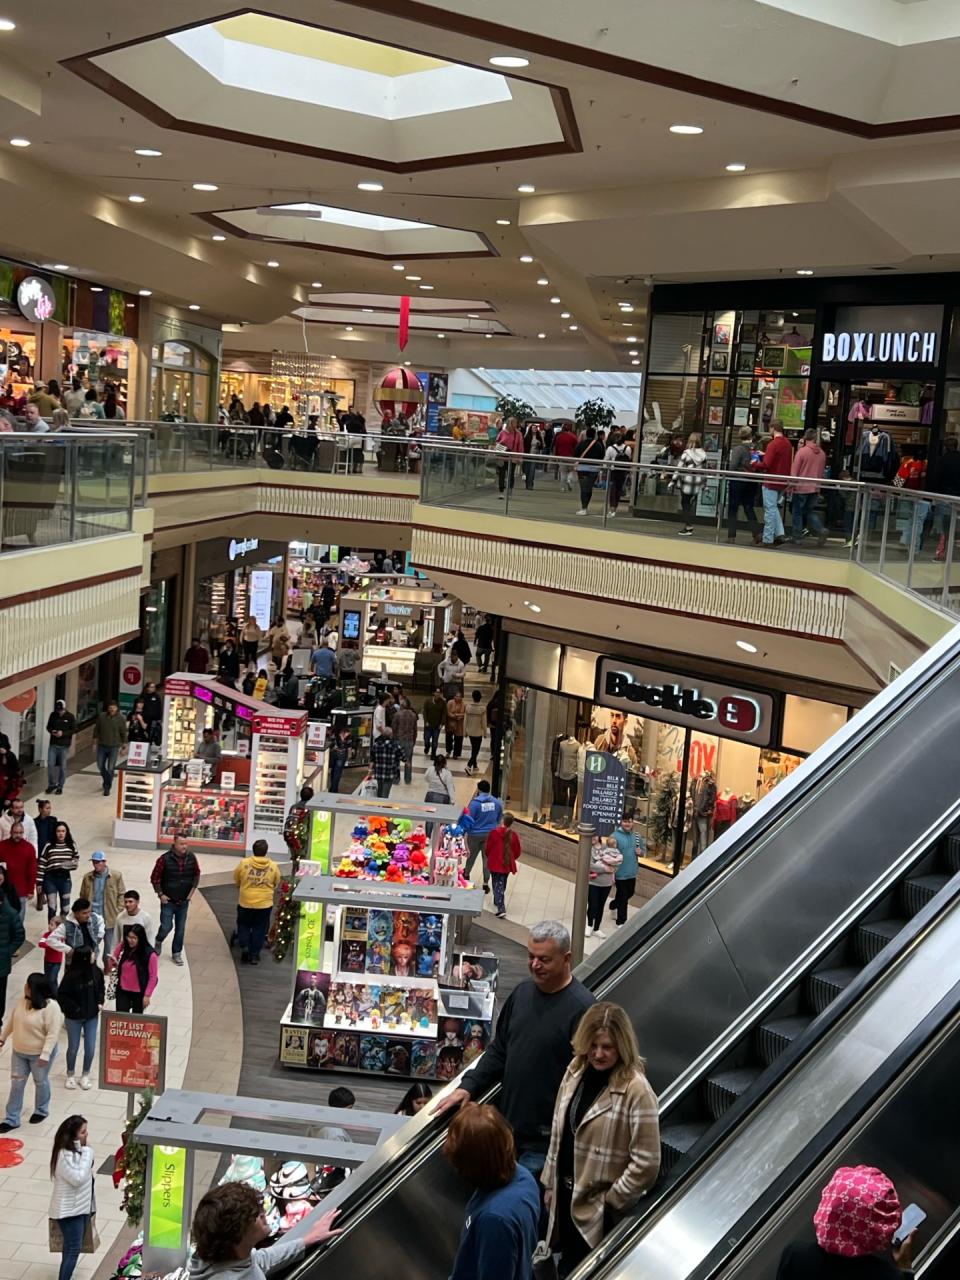 The scene on Saturday at Hamilton Place mall in Chattanooga, Tenn., owned by CBL Properties.